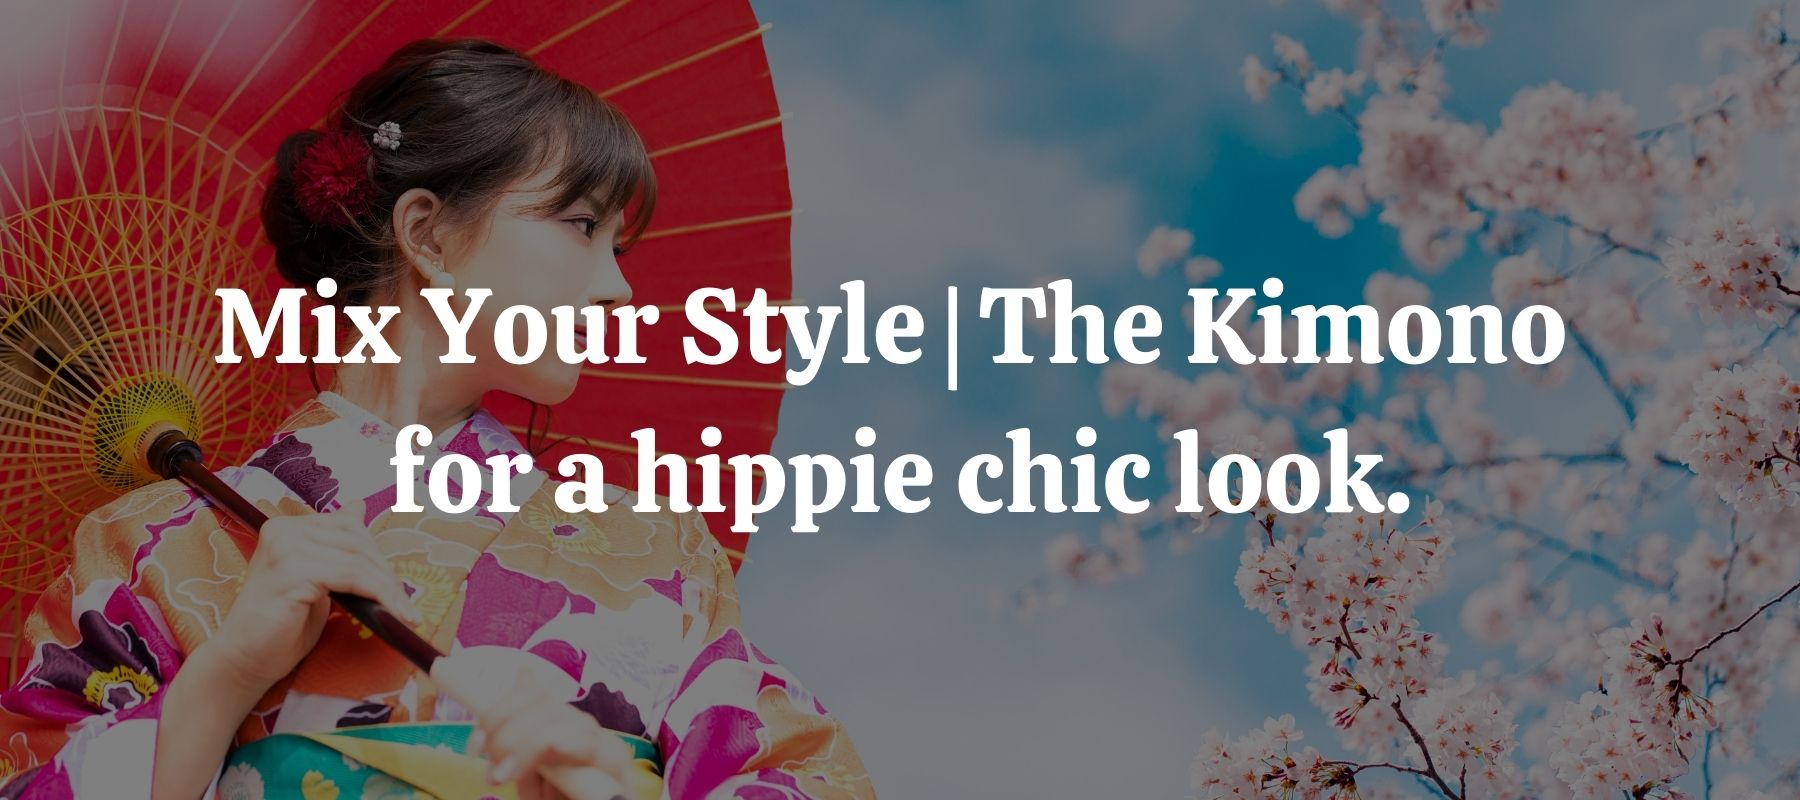 Mix Your Style The Kimono for a hippie chic look